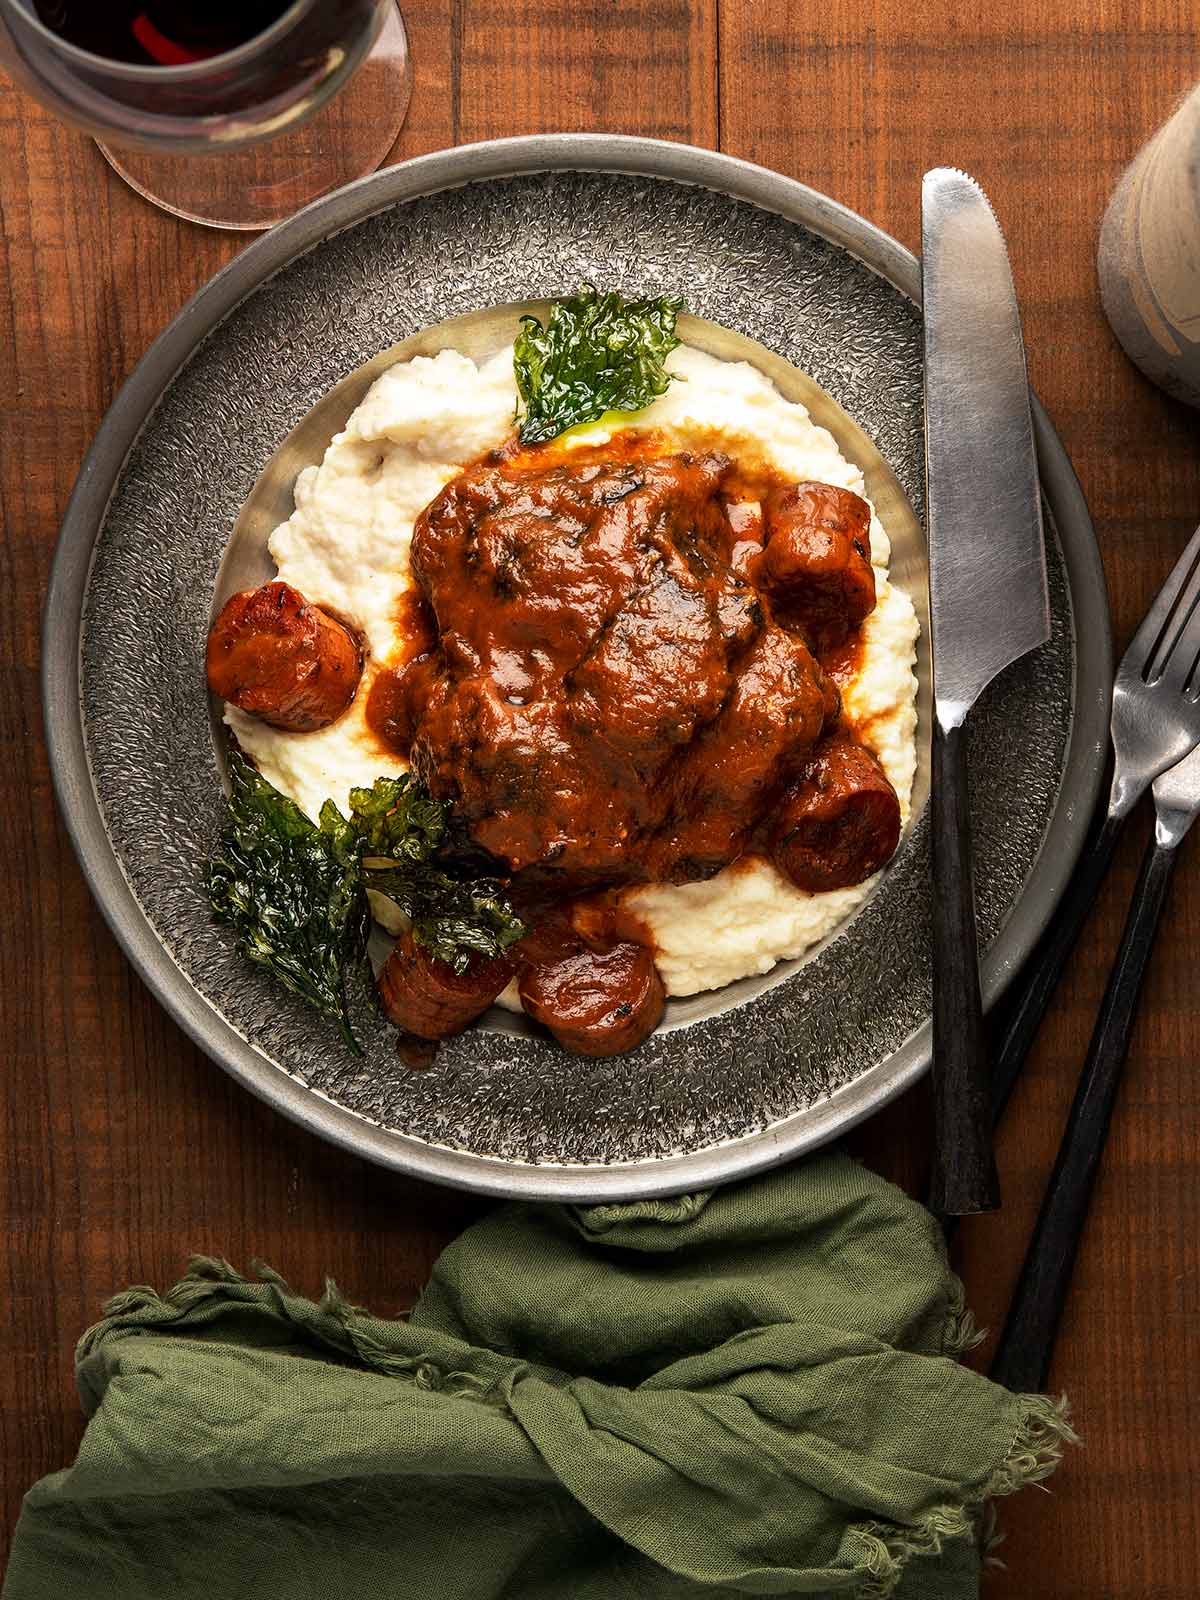 Red wine braised beef cheeks over mashed potatoes.